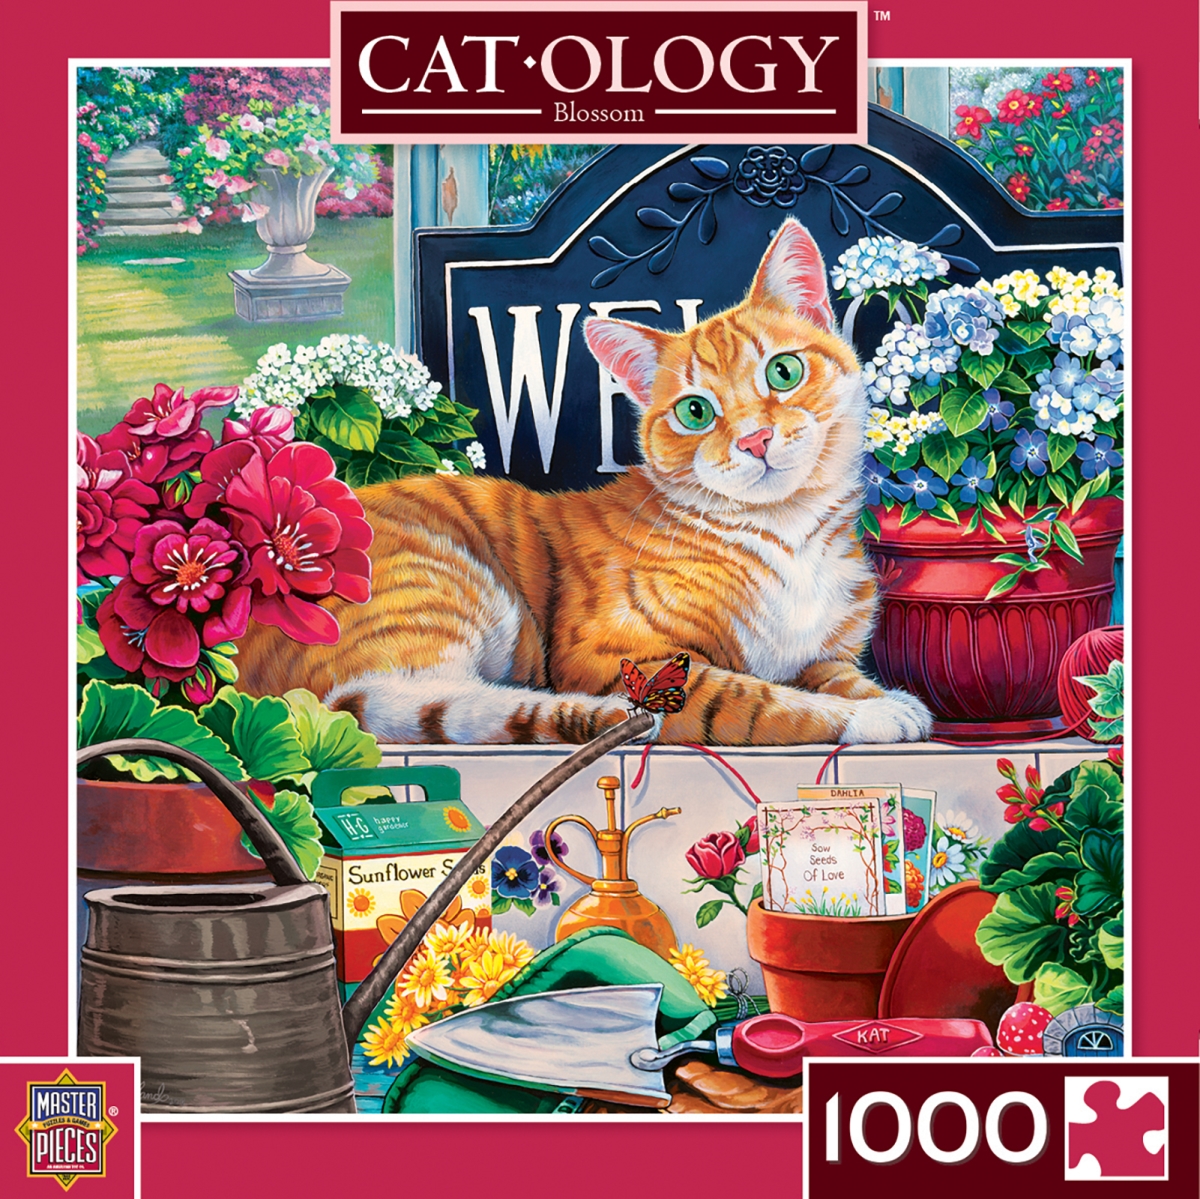 71947 25 X 25 In. Jenny Newland Catology Blossom Square Jigsaw Puzzle - 1000 Piece